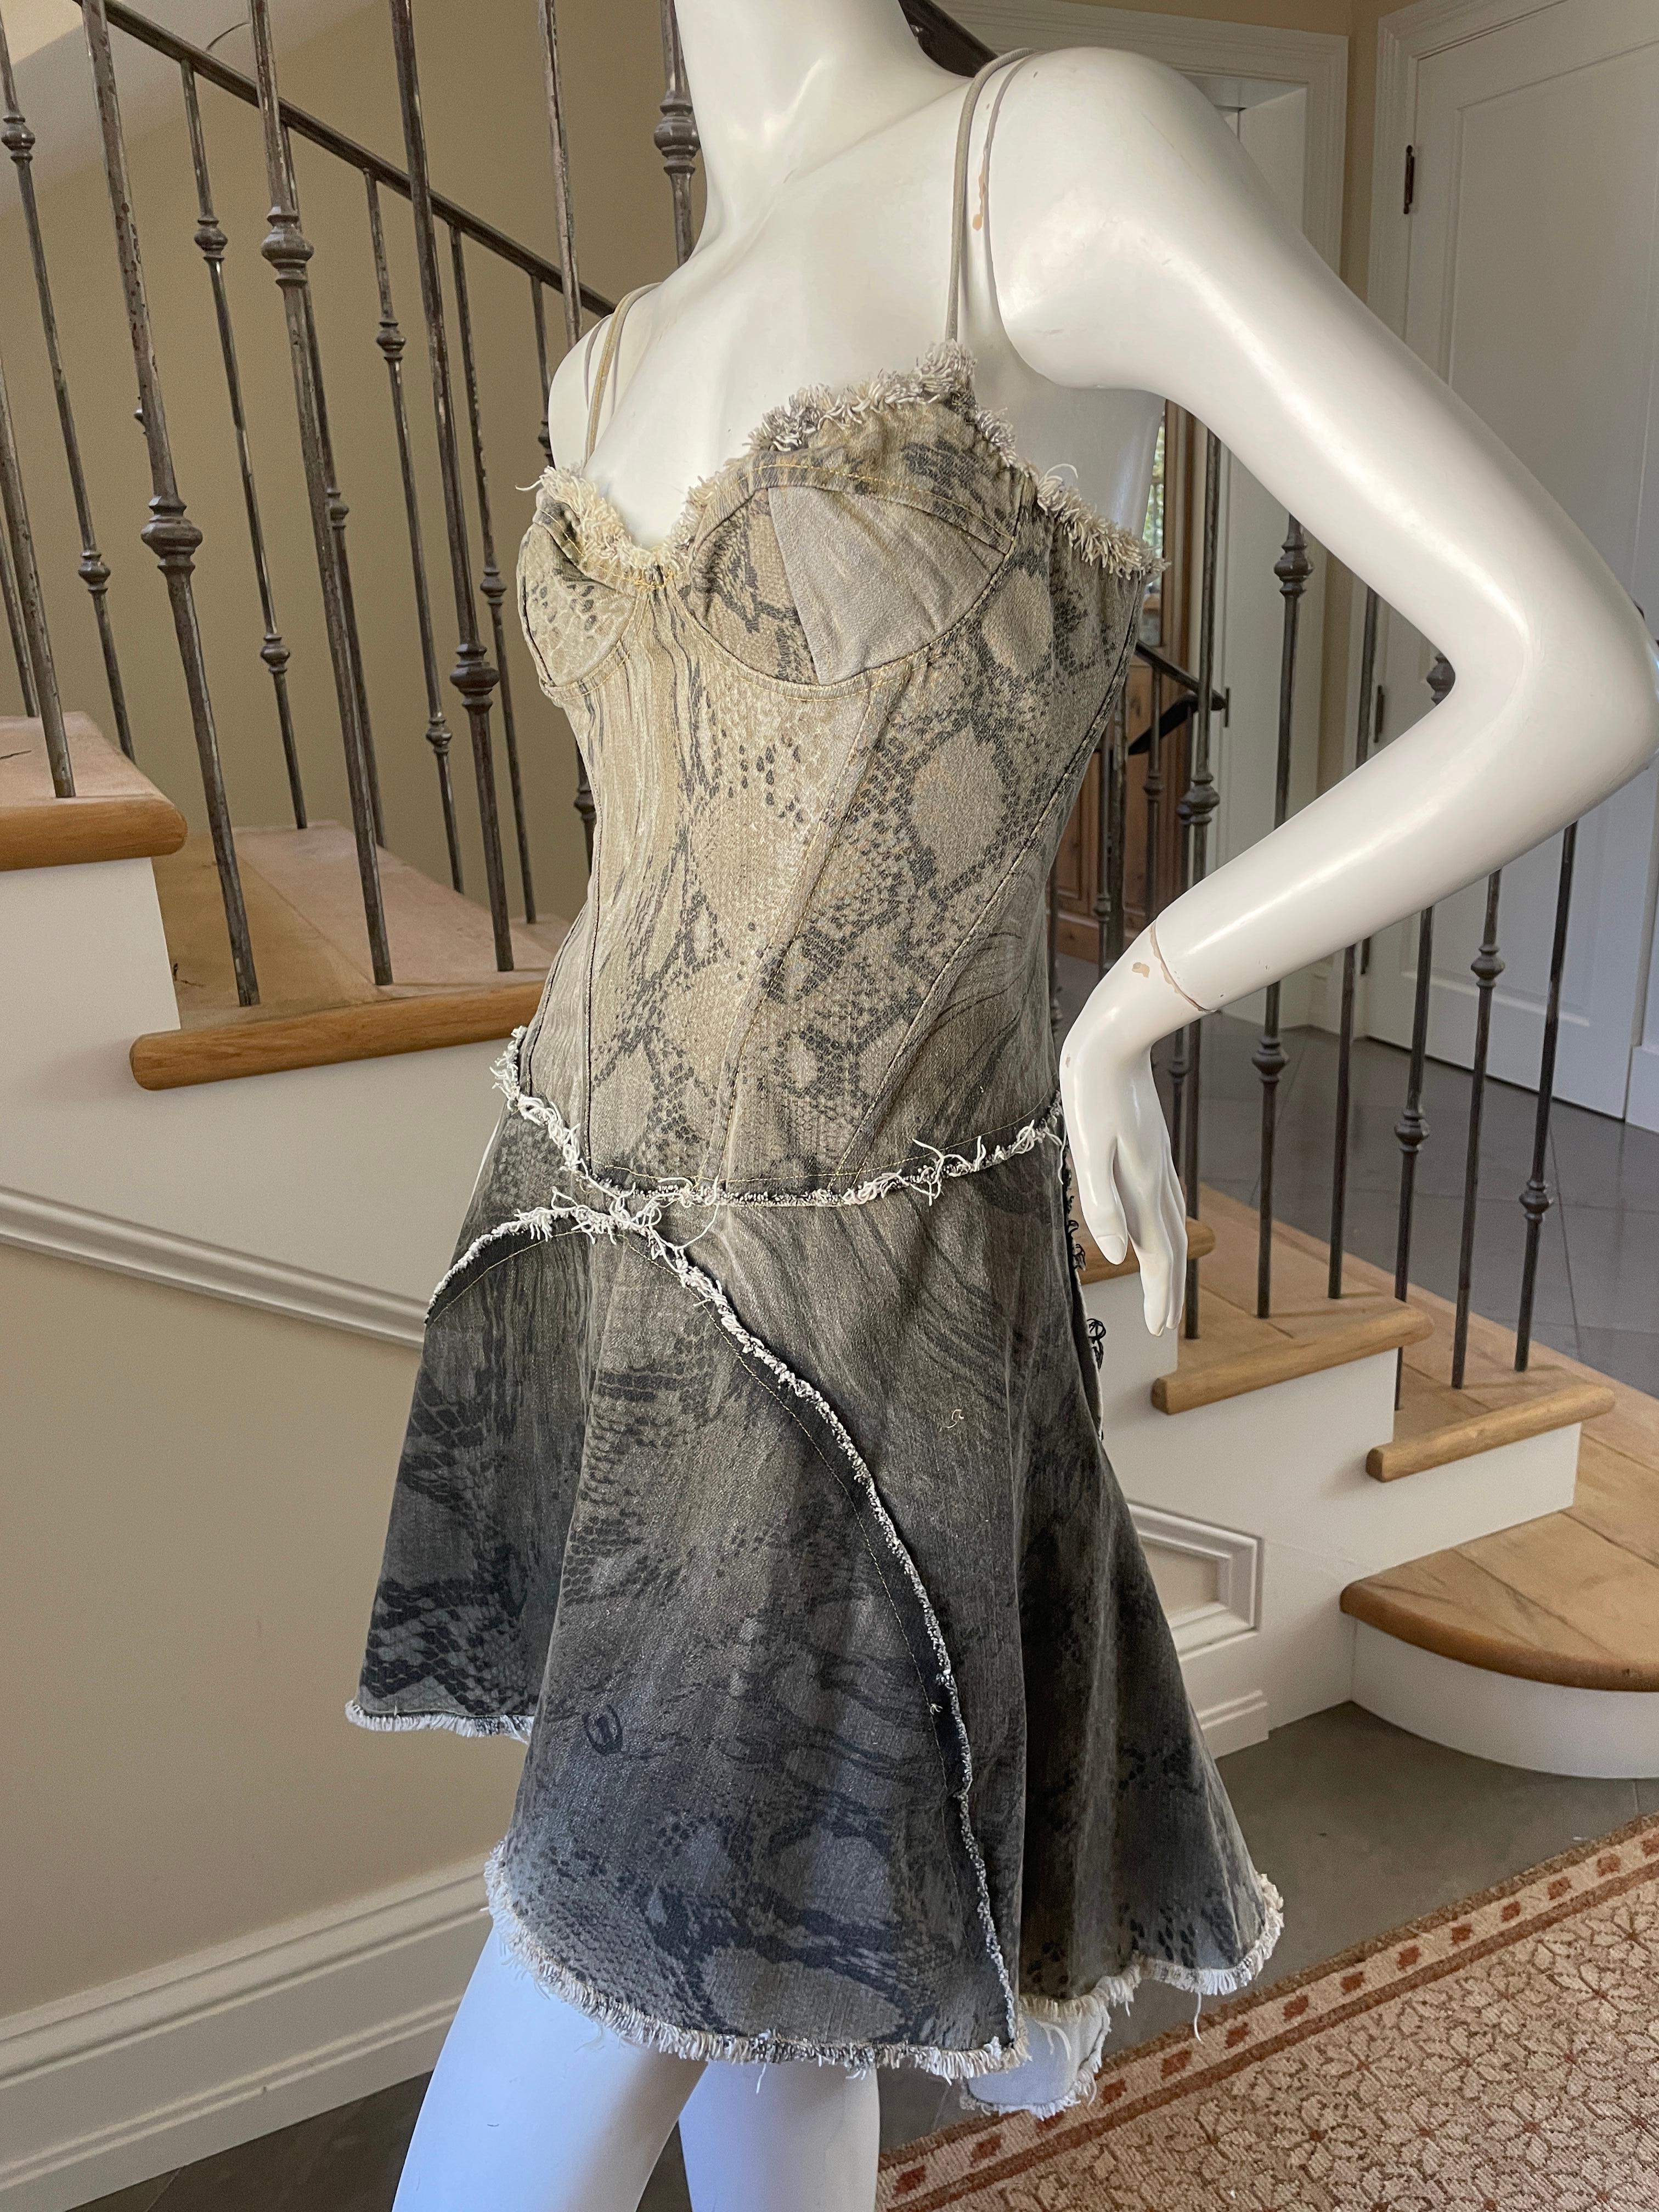 Just Cavalli Vintage Cotton Denim Snake Print Corset Dress by Roberto Cavalli In Excellent Condition For Sale In Cloverdale, CA